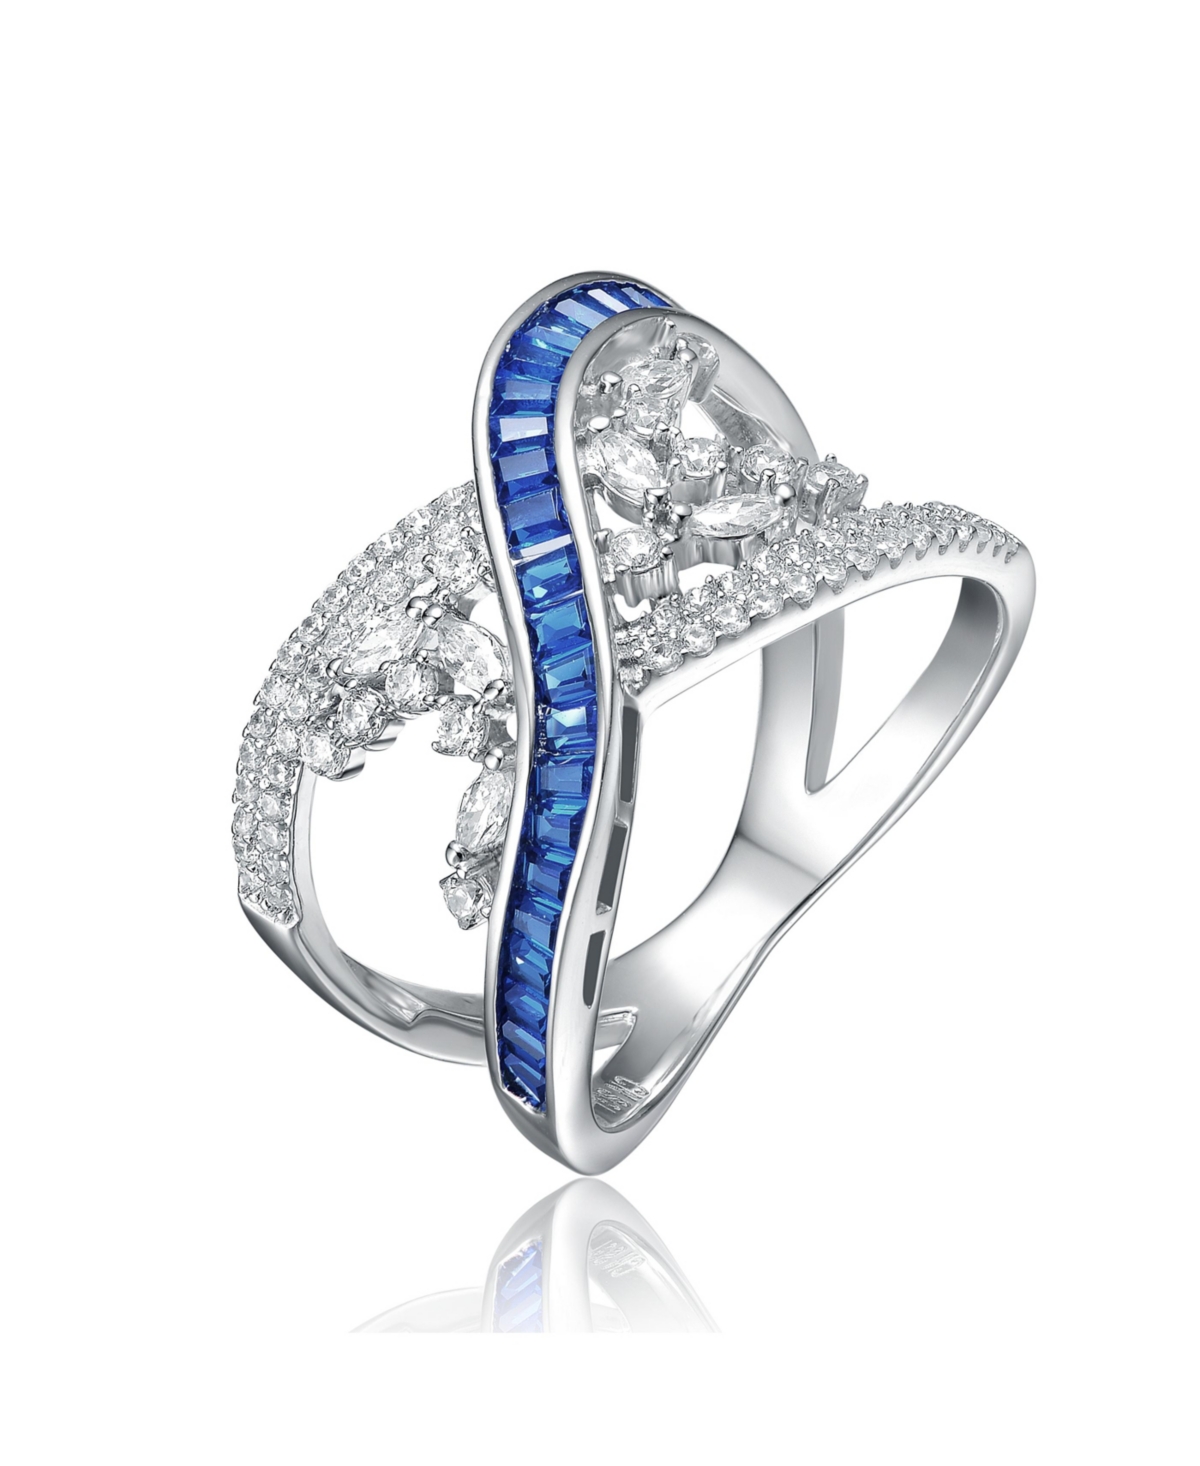 Sterling Silver Rhodium Plated with Sapphire Cubic Zirconia Criss-Cross Ring - Sapphire